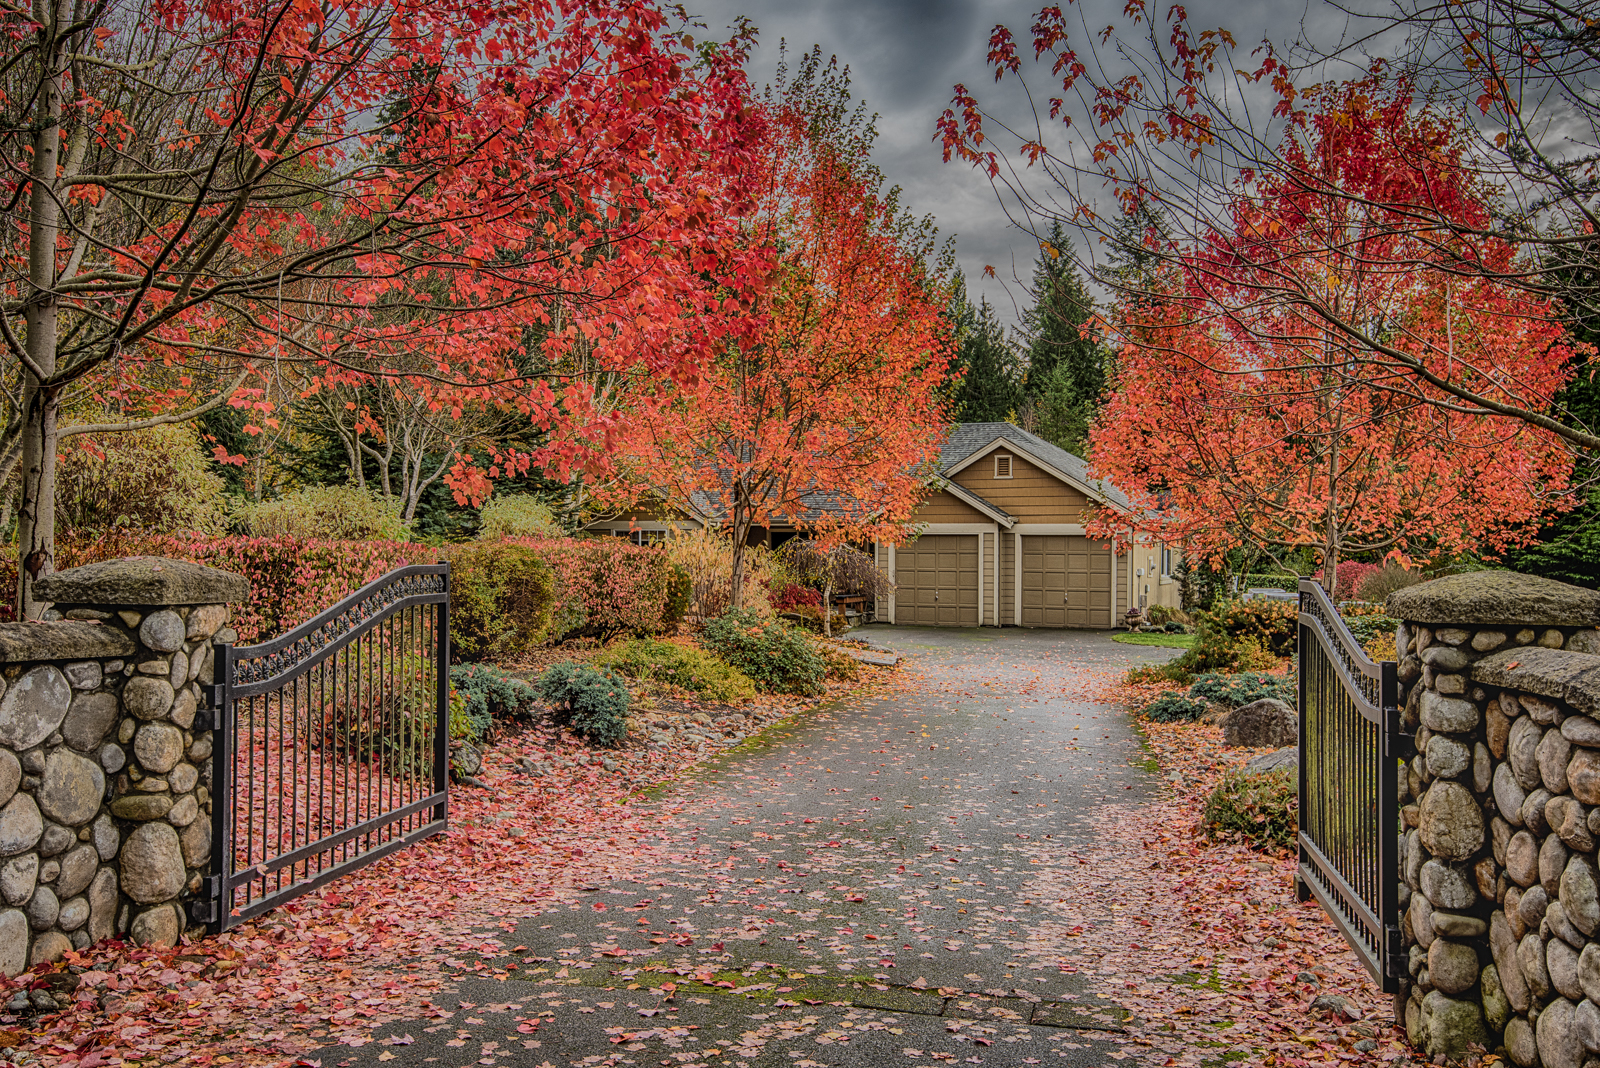 Gated home surrounded by trees with red leaves